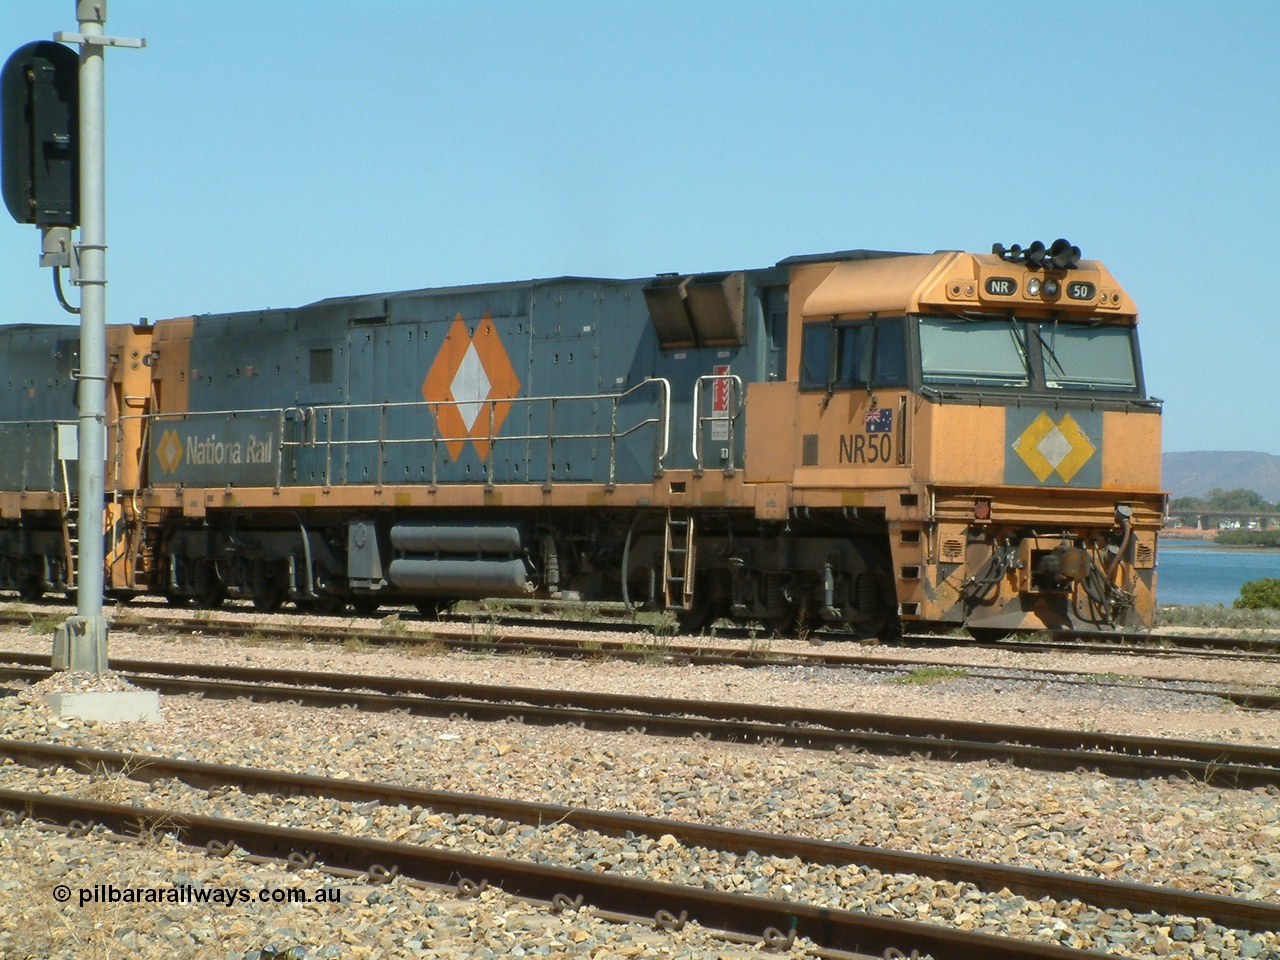 030404 125126
Port Augusta Spencer Junction yard, a Perth bound intermodal awaits departure time on 13 Road behind National Rail NR class units built by Goninan as GE Cv40-9i models, NR 50 serial 7250-08 / 97-252. 4th April 2003.
Keywords: NR-class;NR50;Goninan;GE;Cv40-9i;7250-08/97-252;